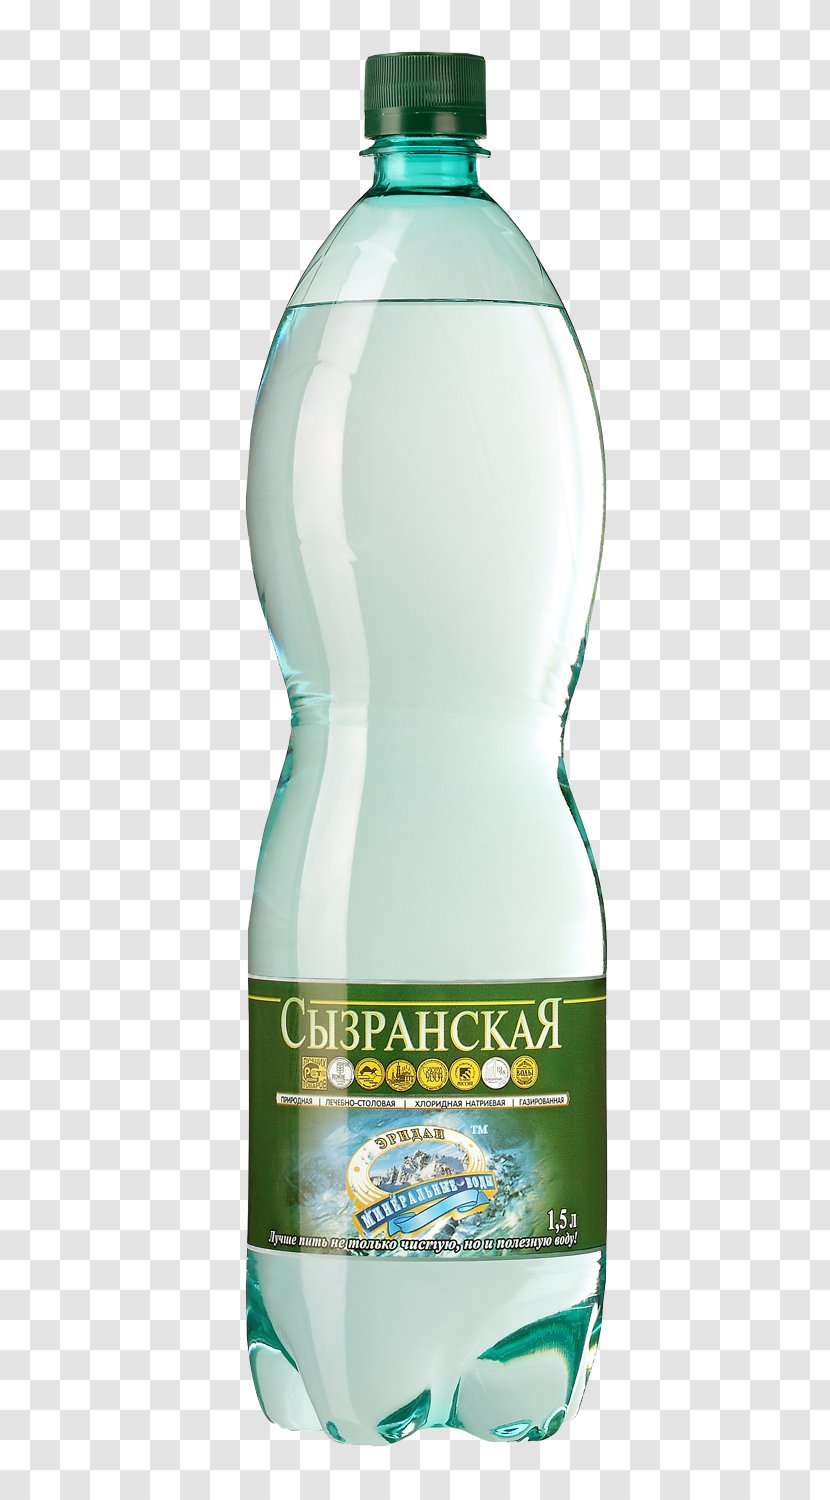 Moscow Borjomi Plastic Bottle Mineral Water - Product Design - Image Transparent PNG